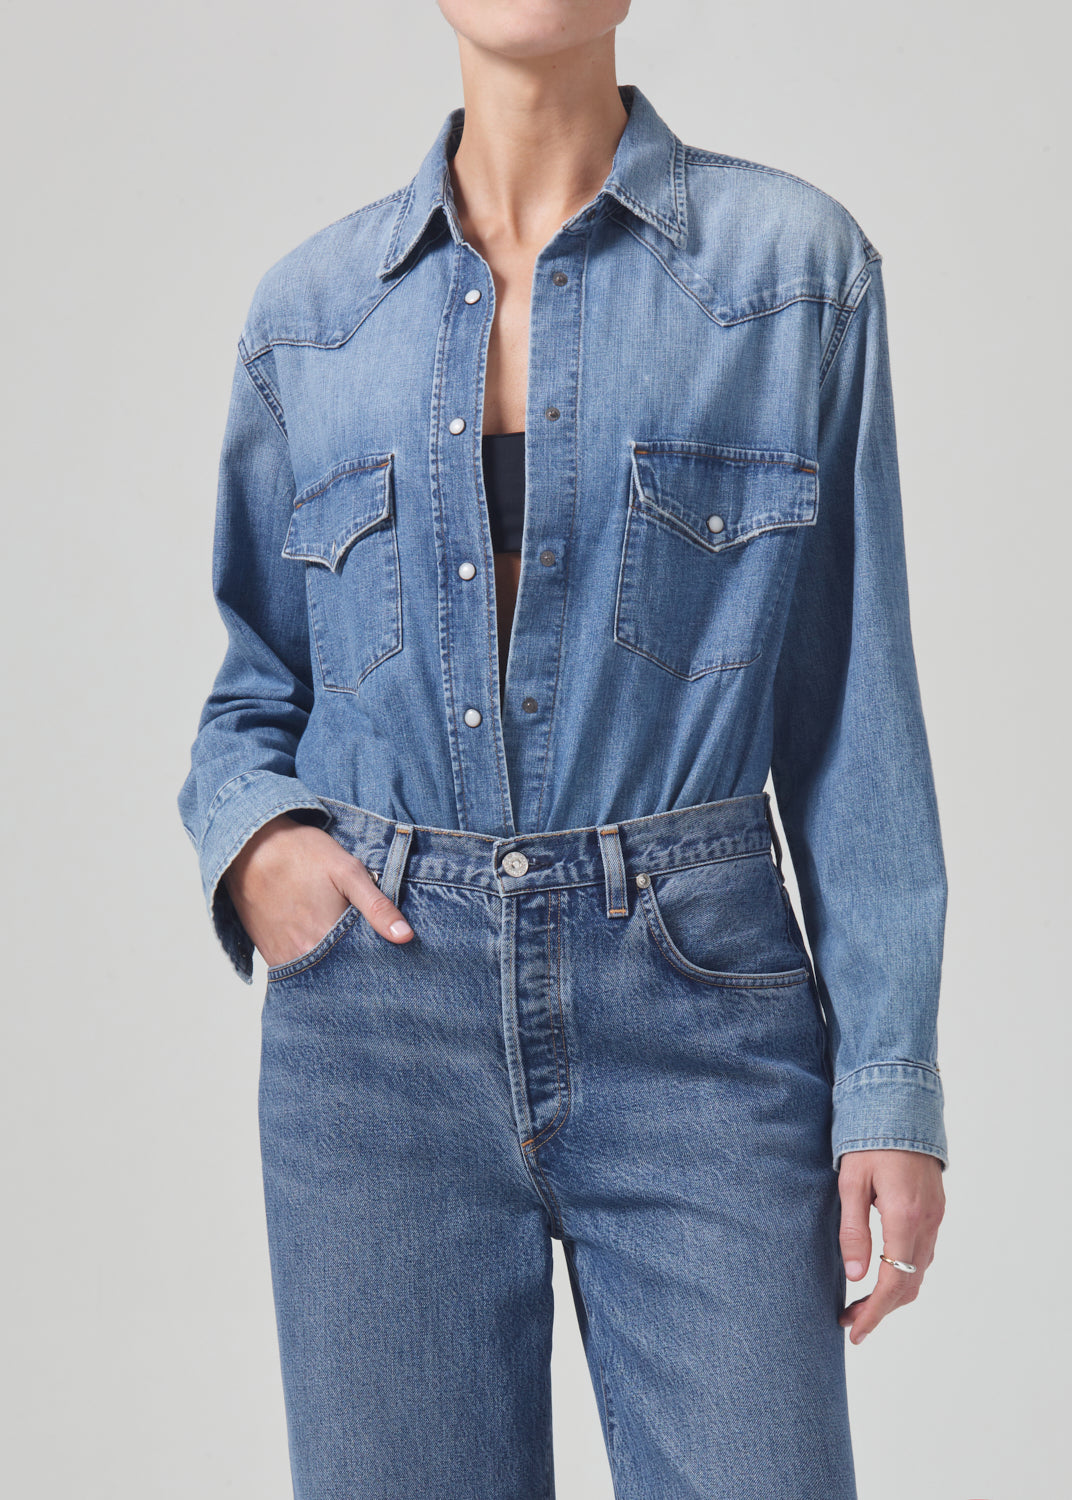 Cropped Western Shirt in Carolina Blue – Citizens of Humanity